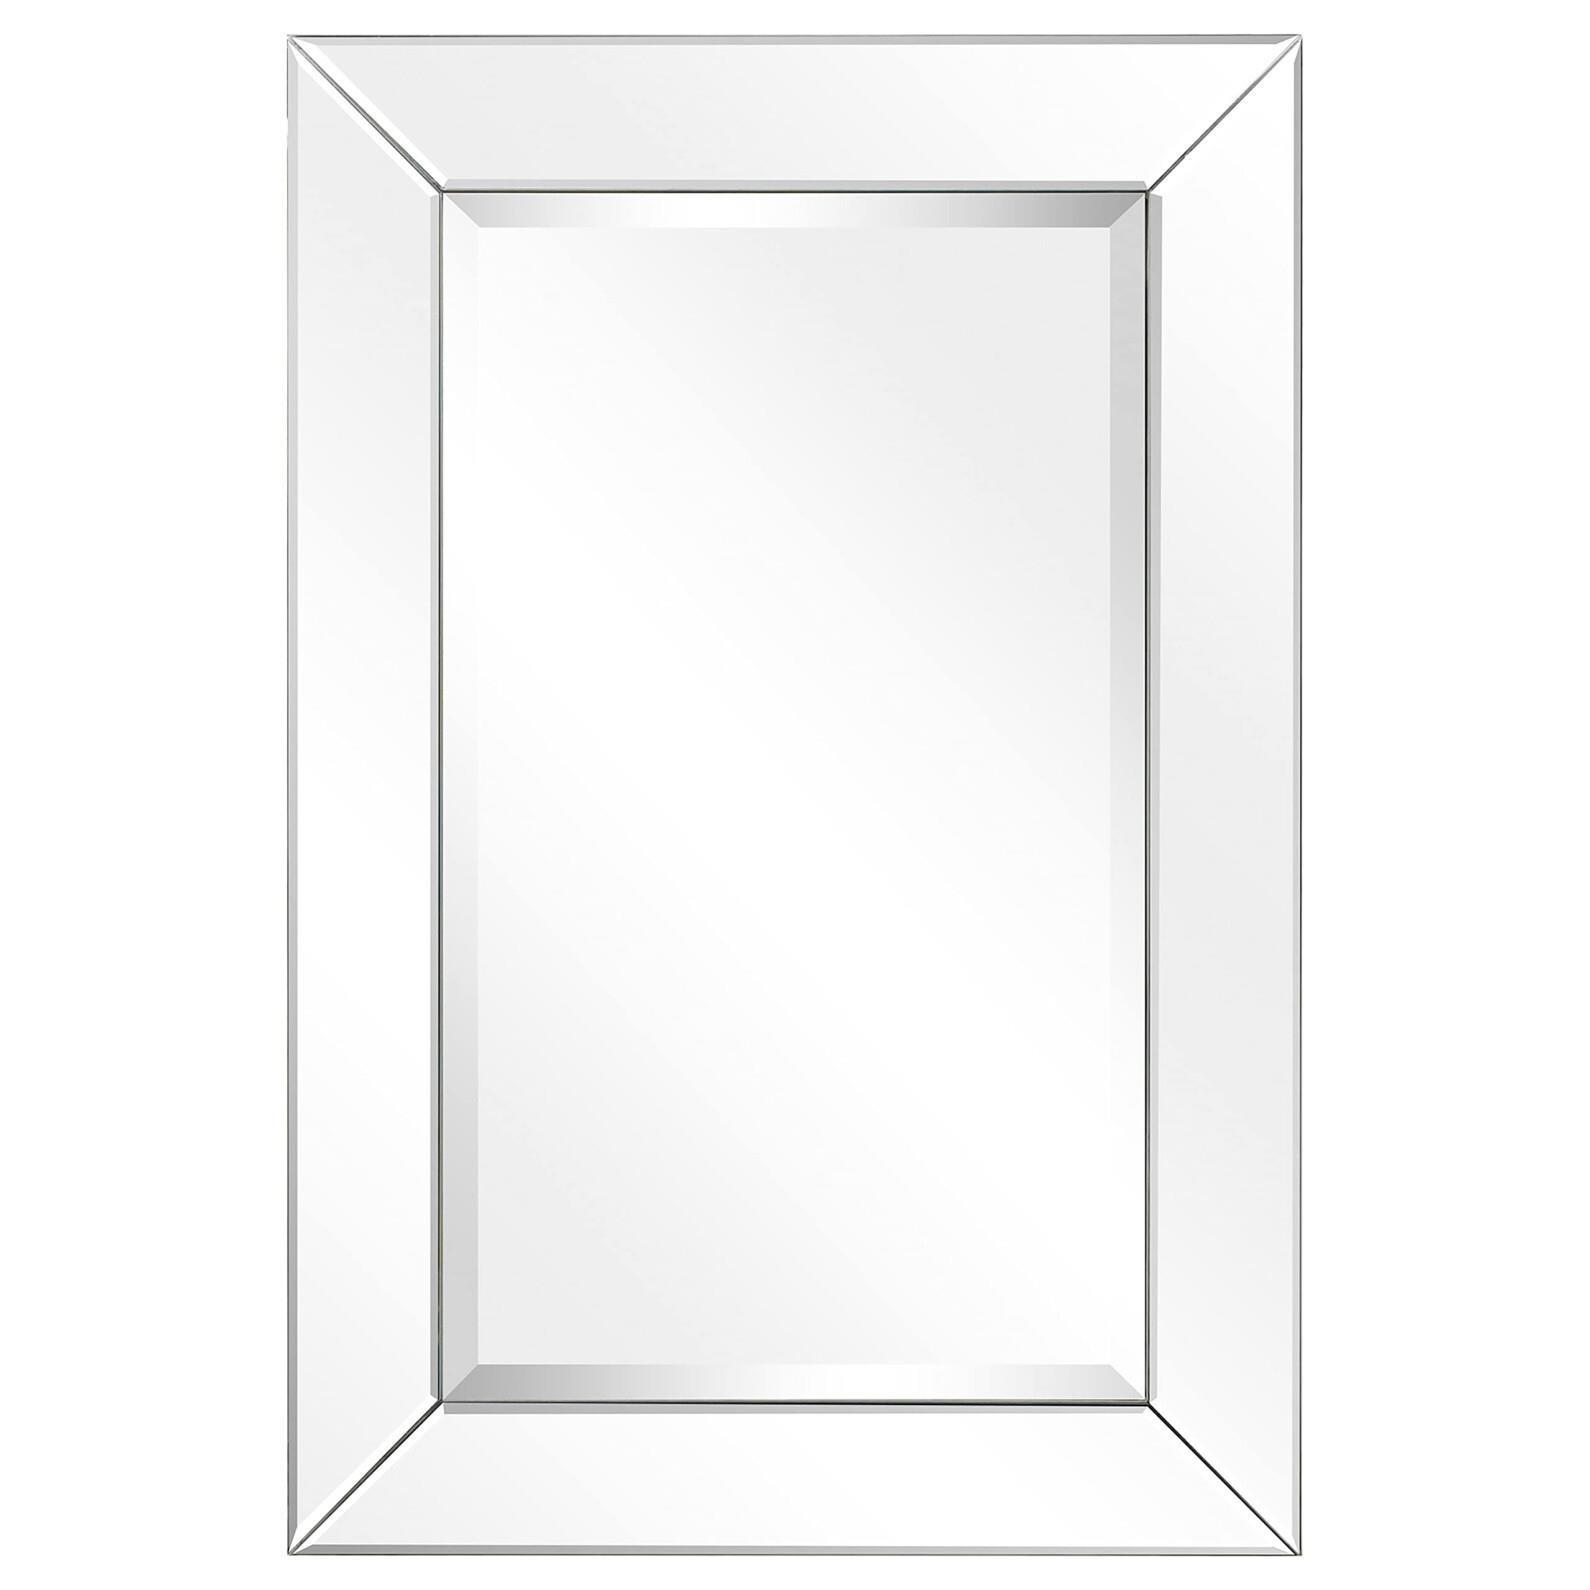 Empire Art Direct Solid Wood Frame Wall Mirror Cov